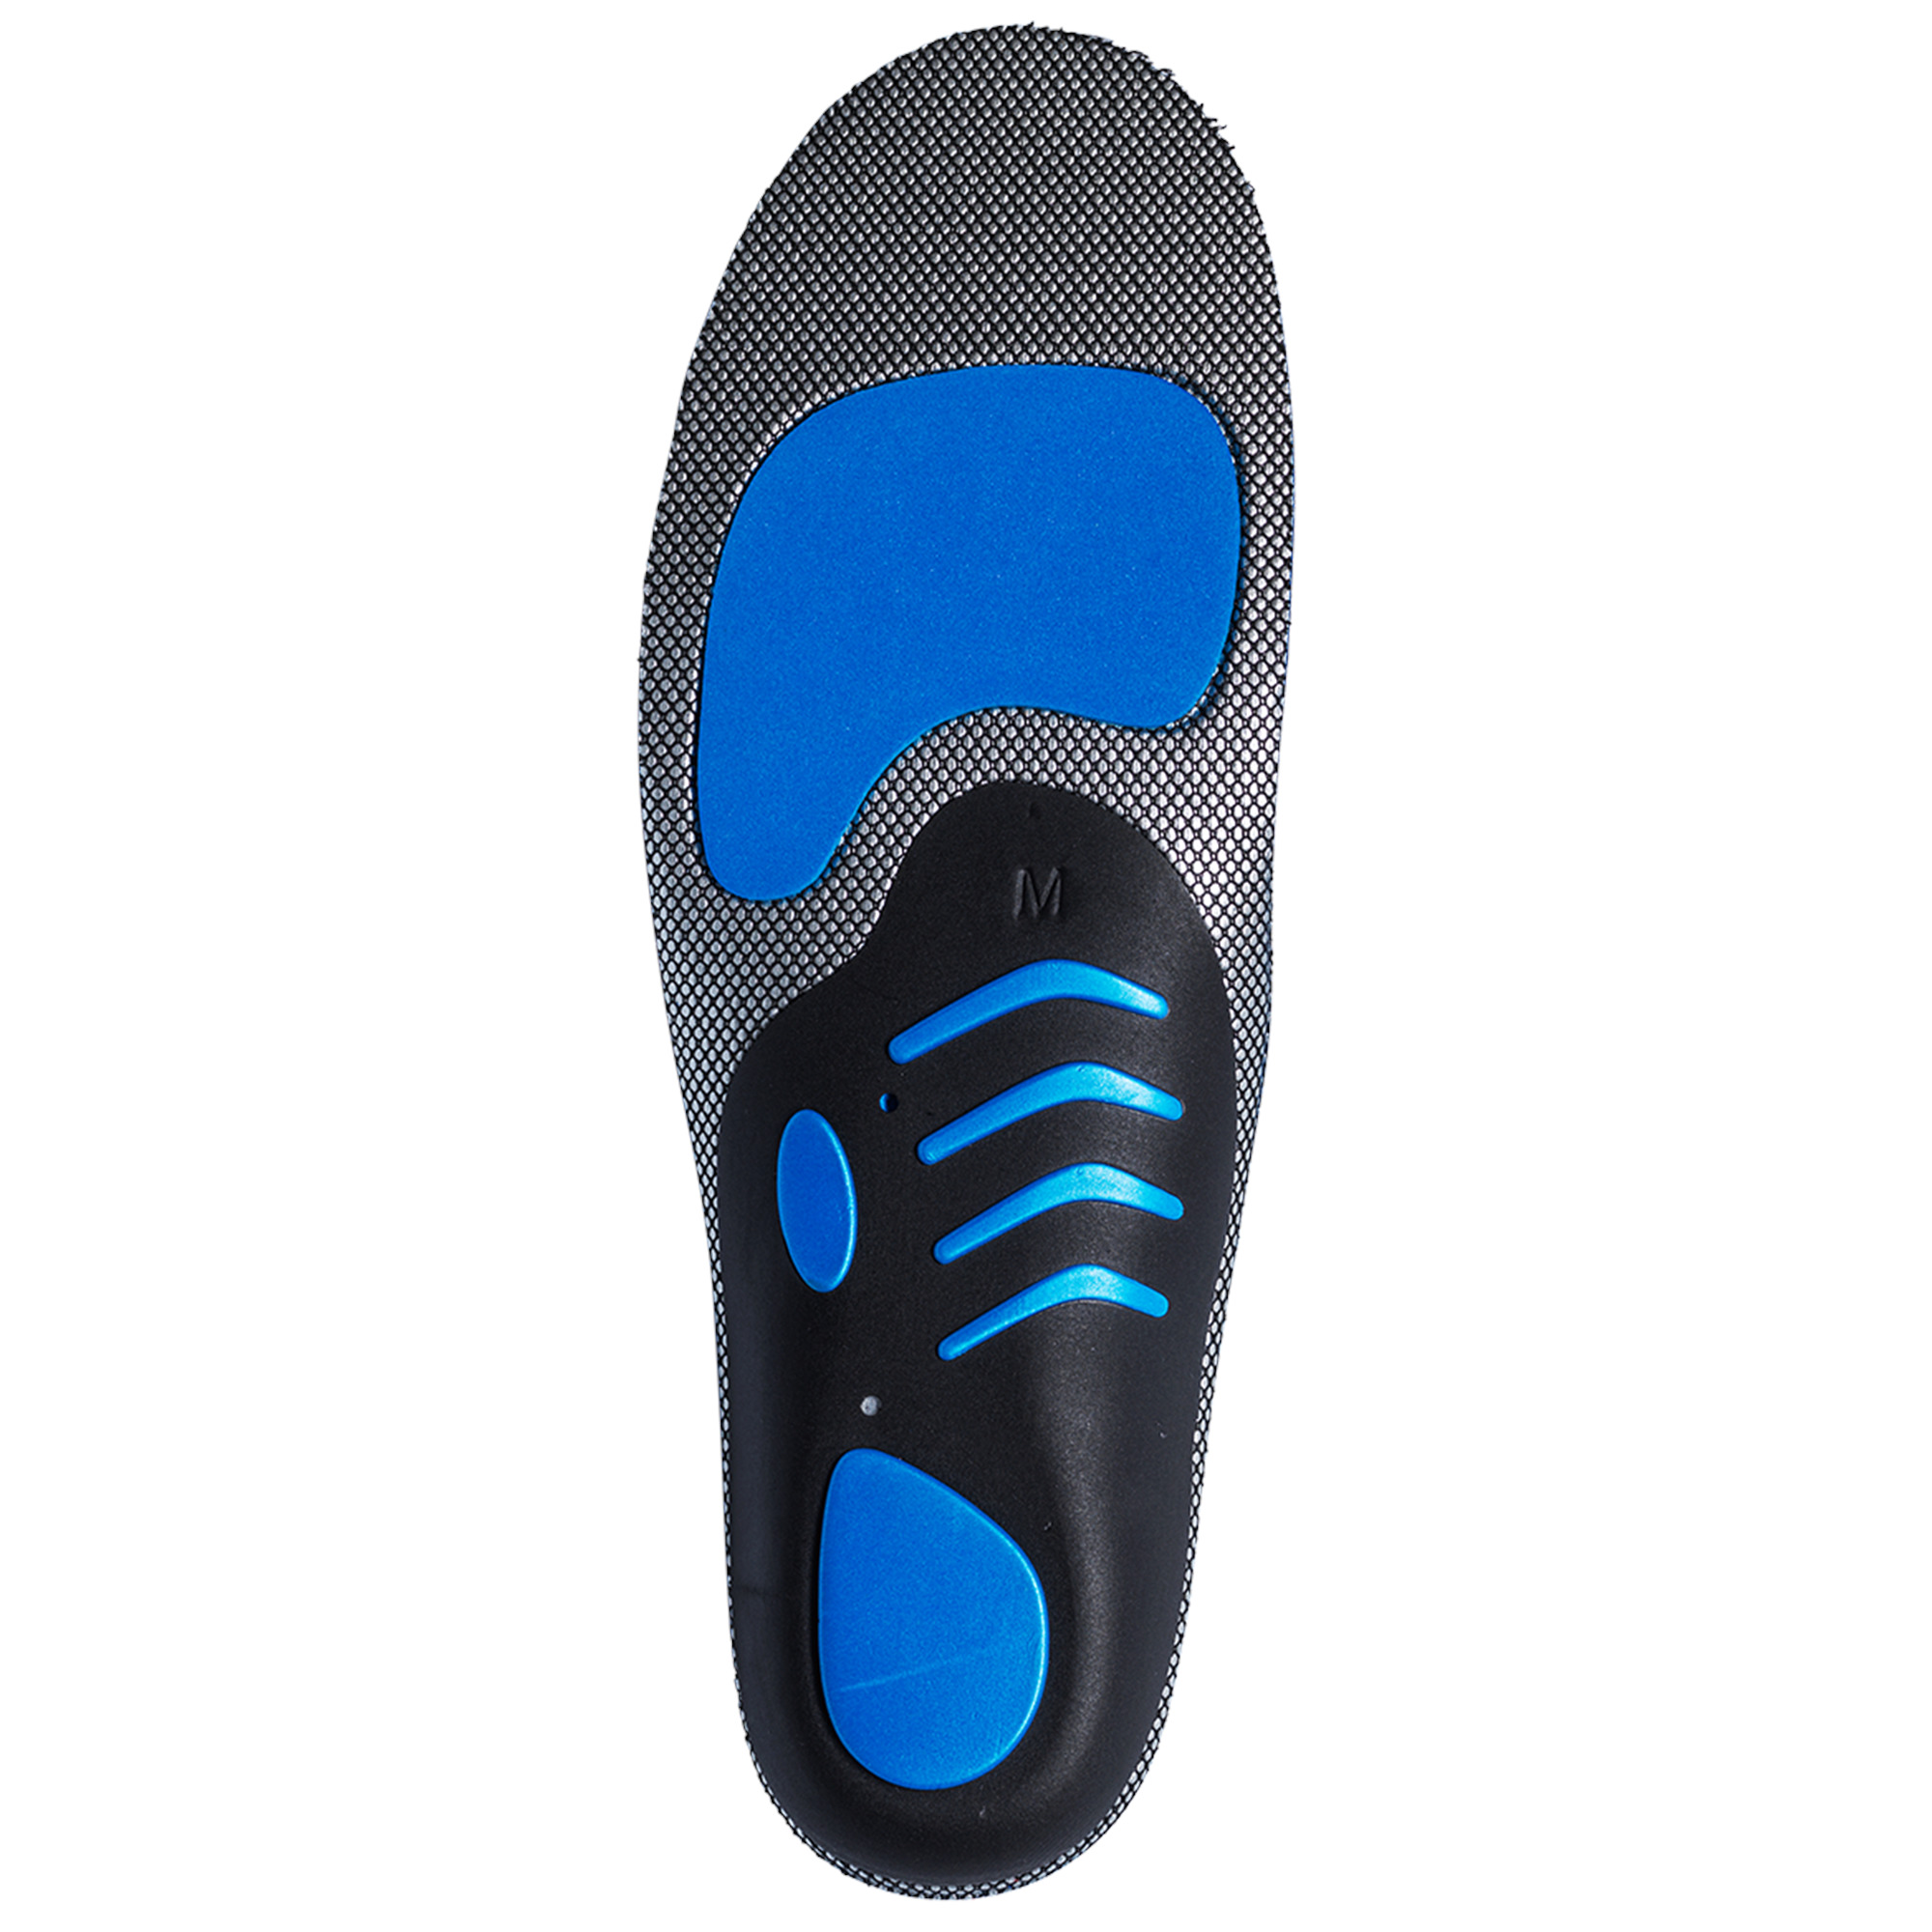 COMFORT Mid Arch insoles